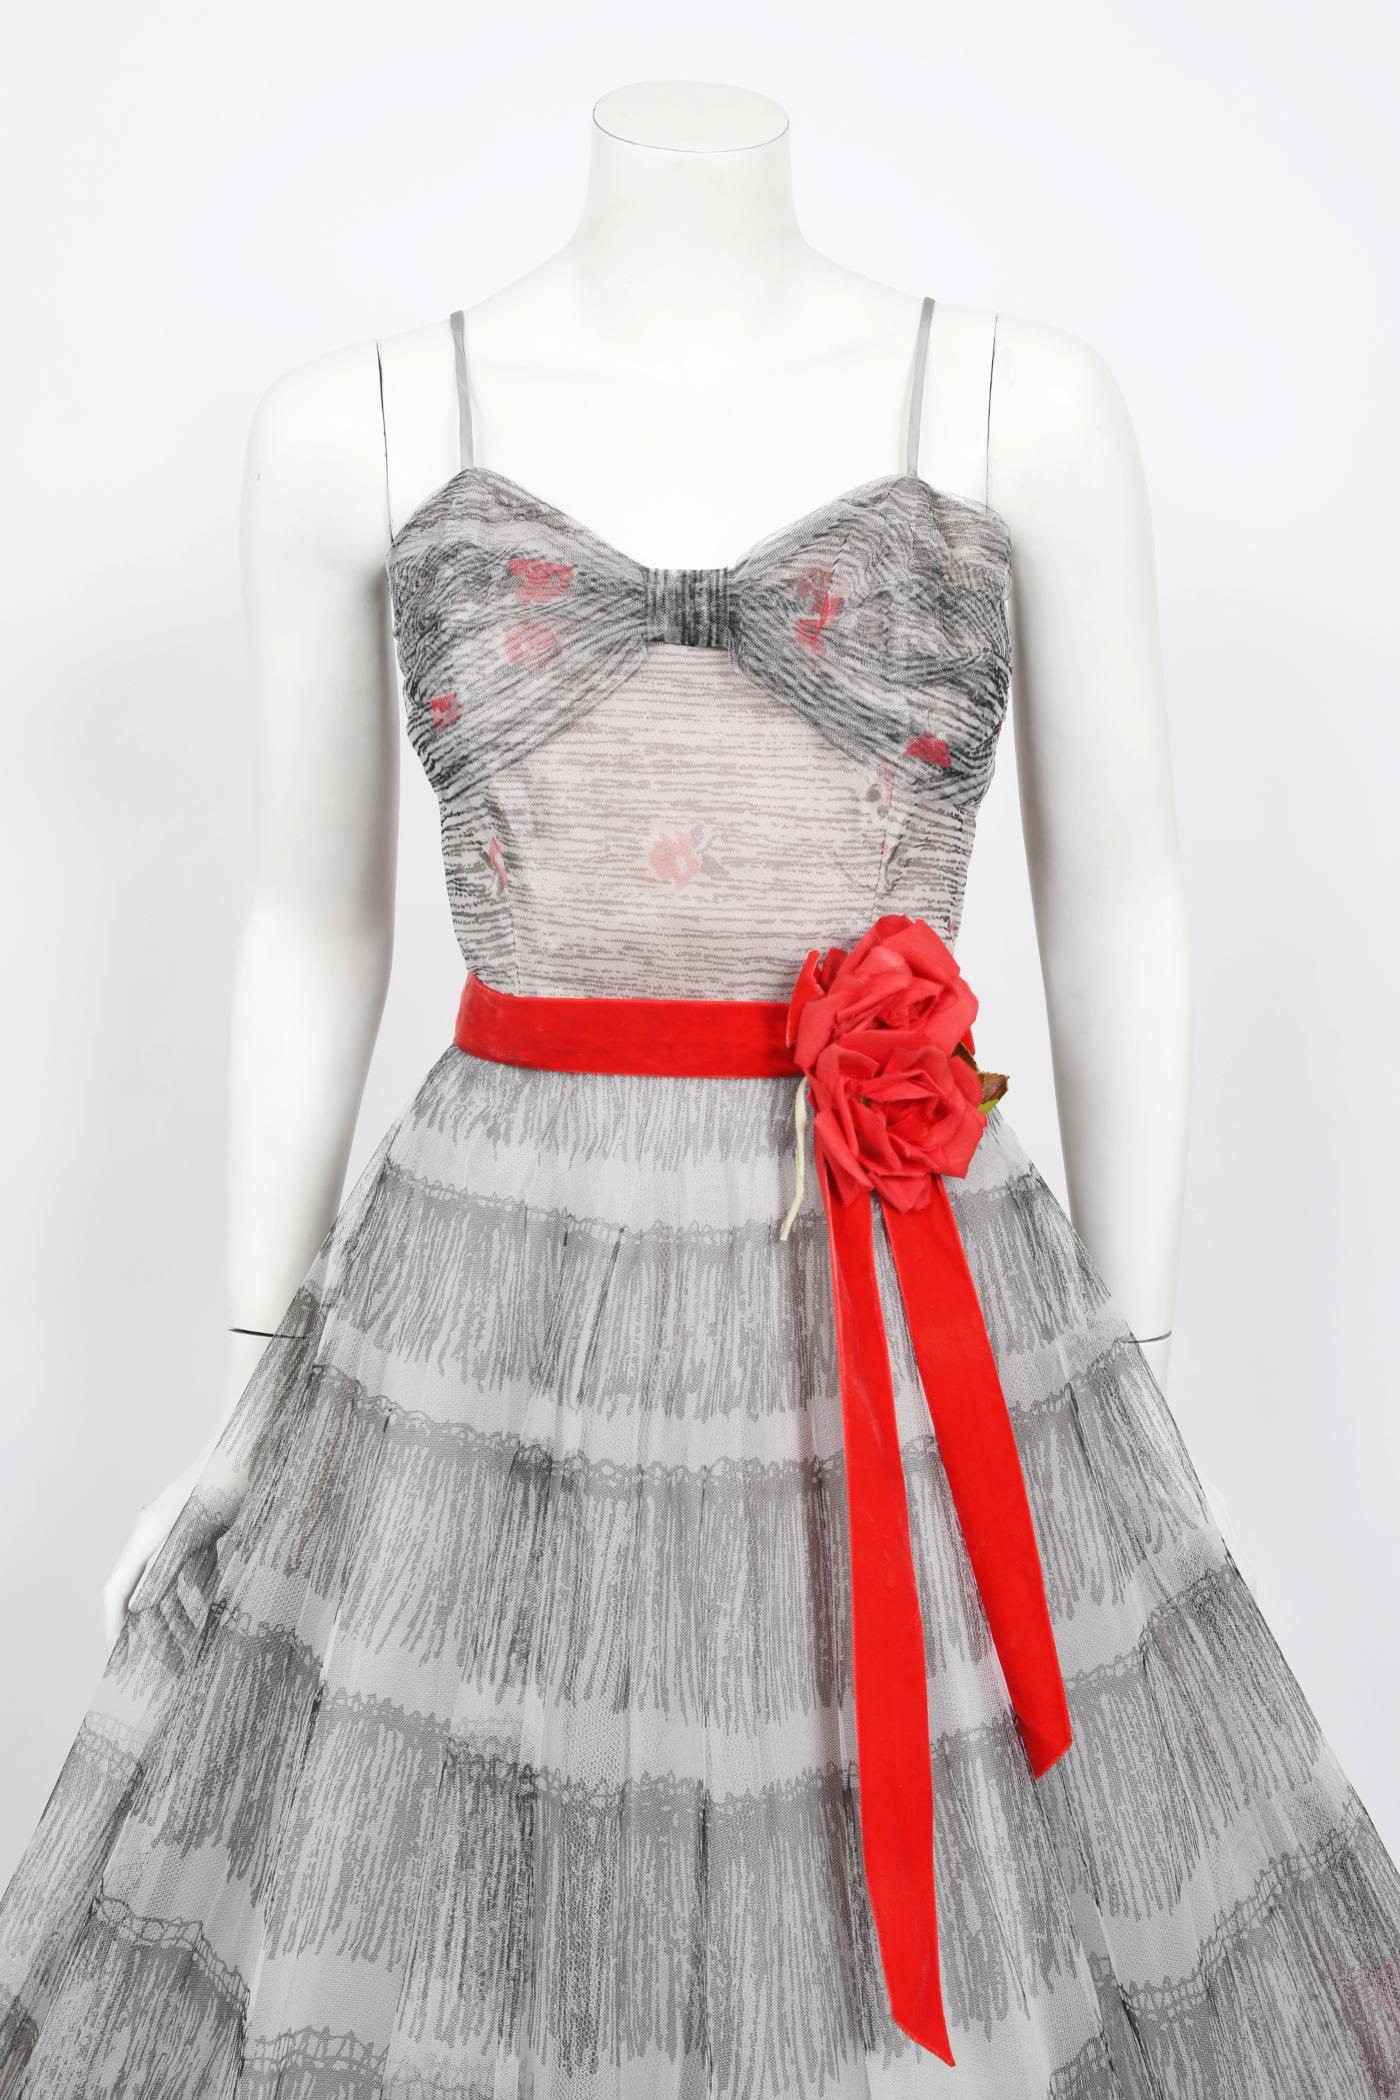 An absolutely sensational Emma Domb red roses floral tulle full-skirt party dress dating back to the mid 1950's. This figure flattering silhouette was inspired by Christian Dior's 'new look' and was extremely popular during this time period. Emma